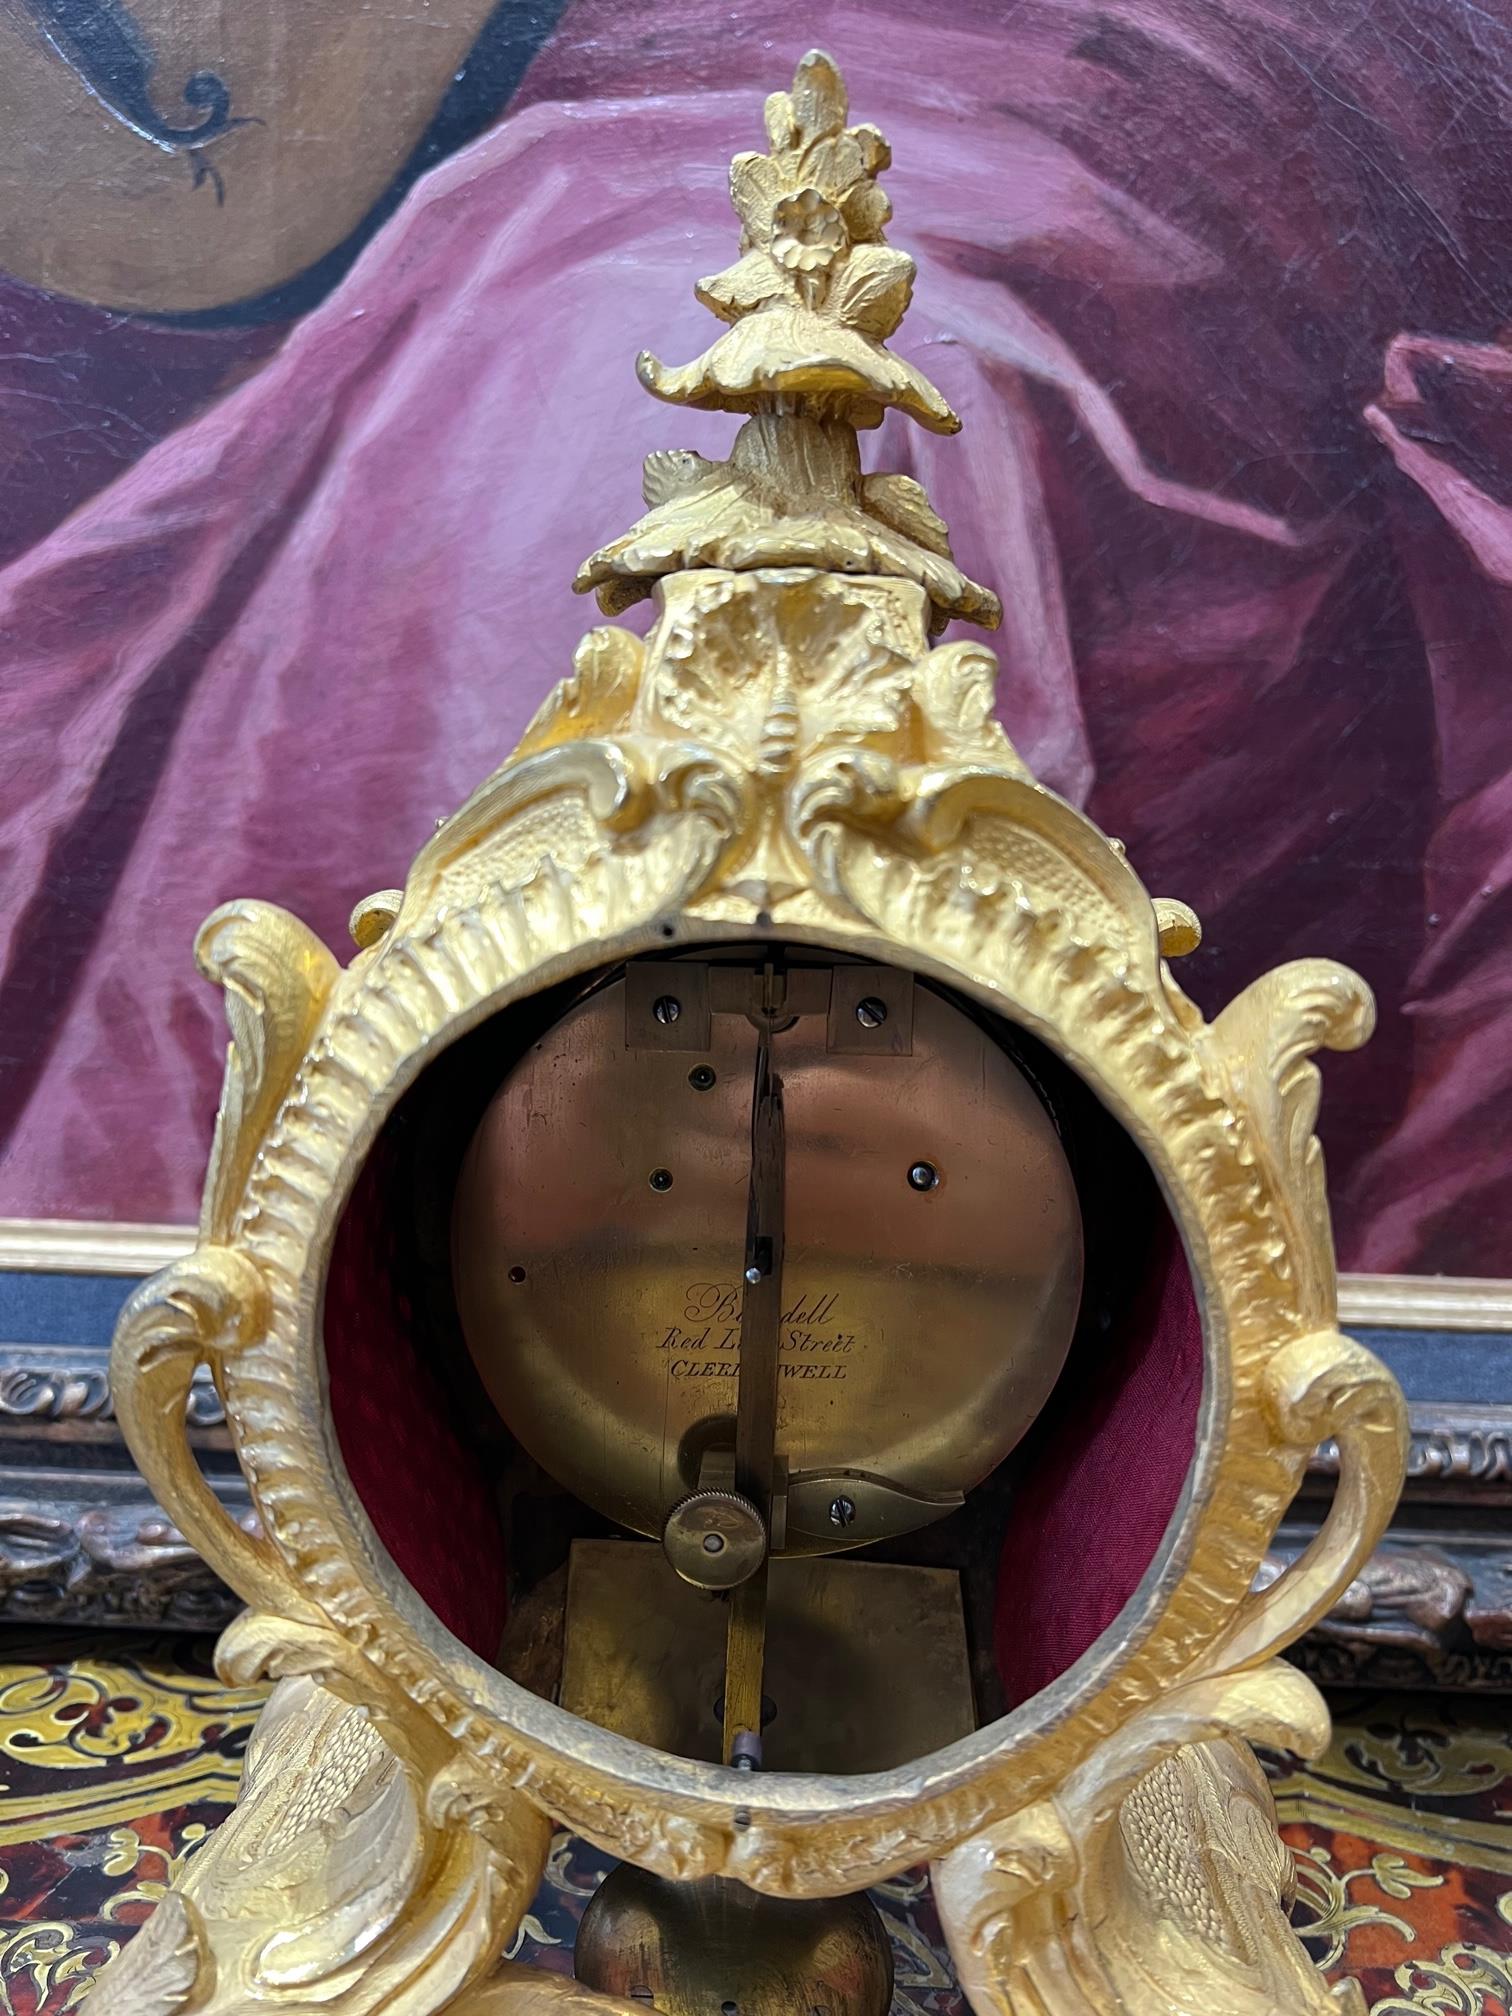 A FINE 1840'S ENGLISH GILT BRONZE MANTEL CLOCK BY HENRY BLUNDELL, LONDON - Image 4 of 6